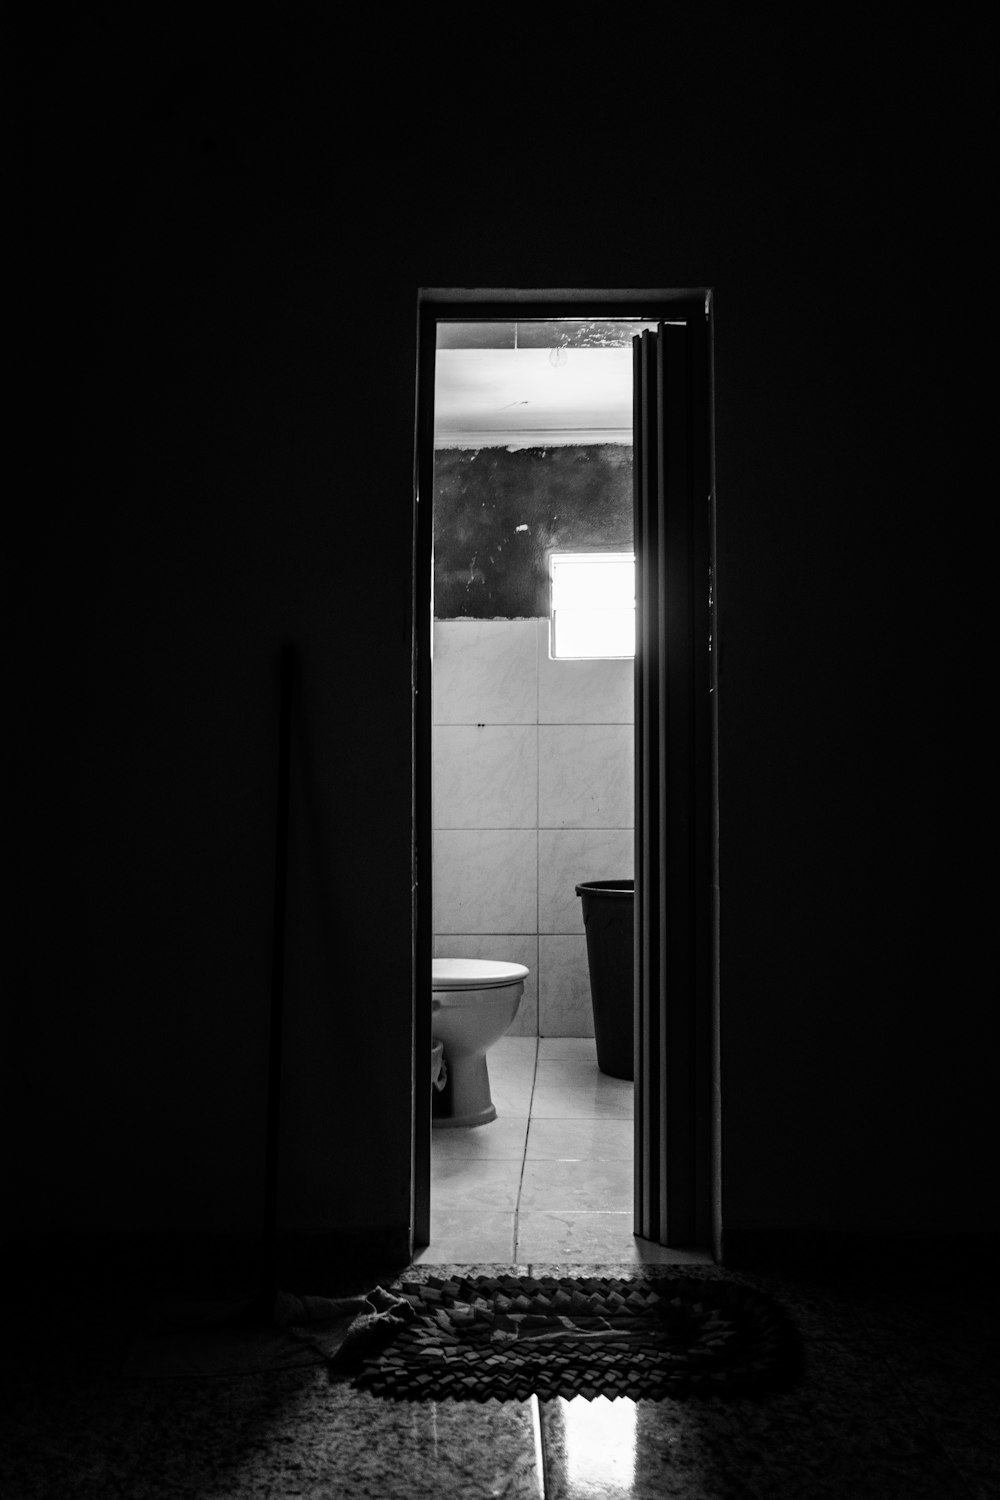 grayscale photography of open door showing toilet bowl